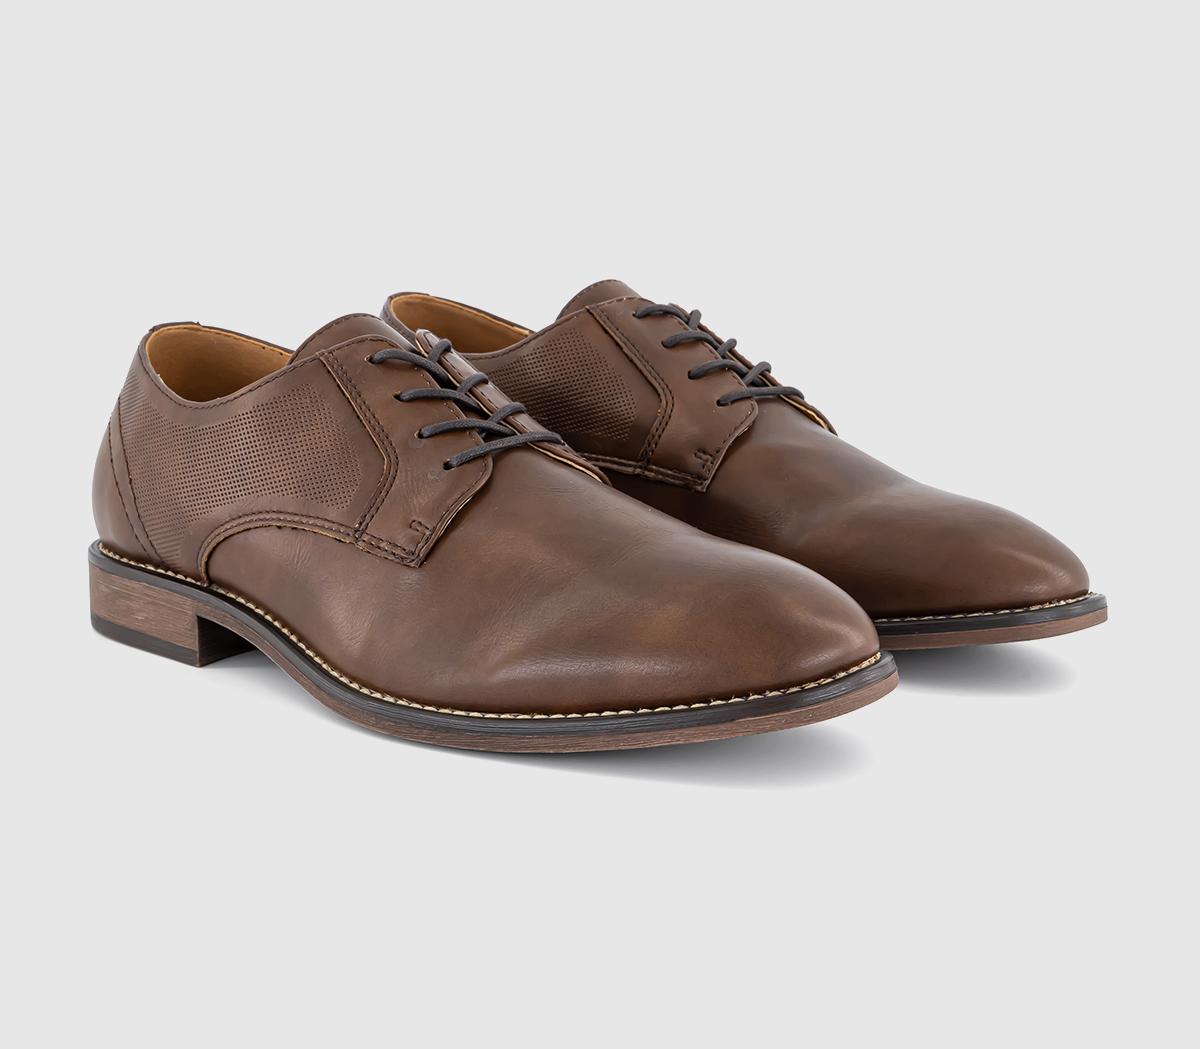 OFFICE Mens Claydon Smart Derby Shoes Brown, 11